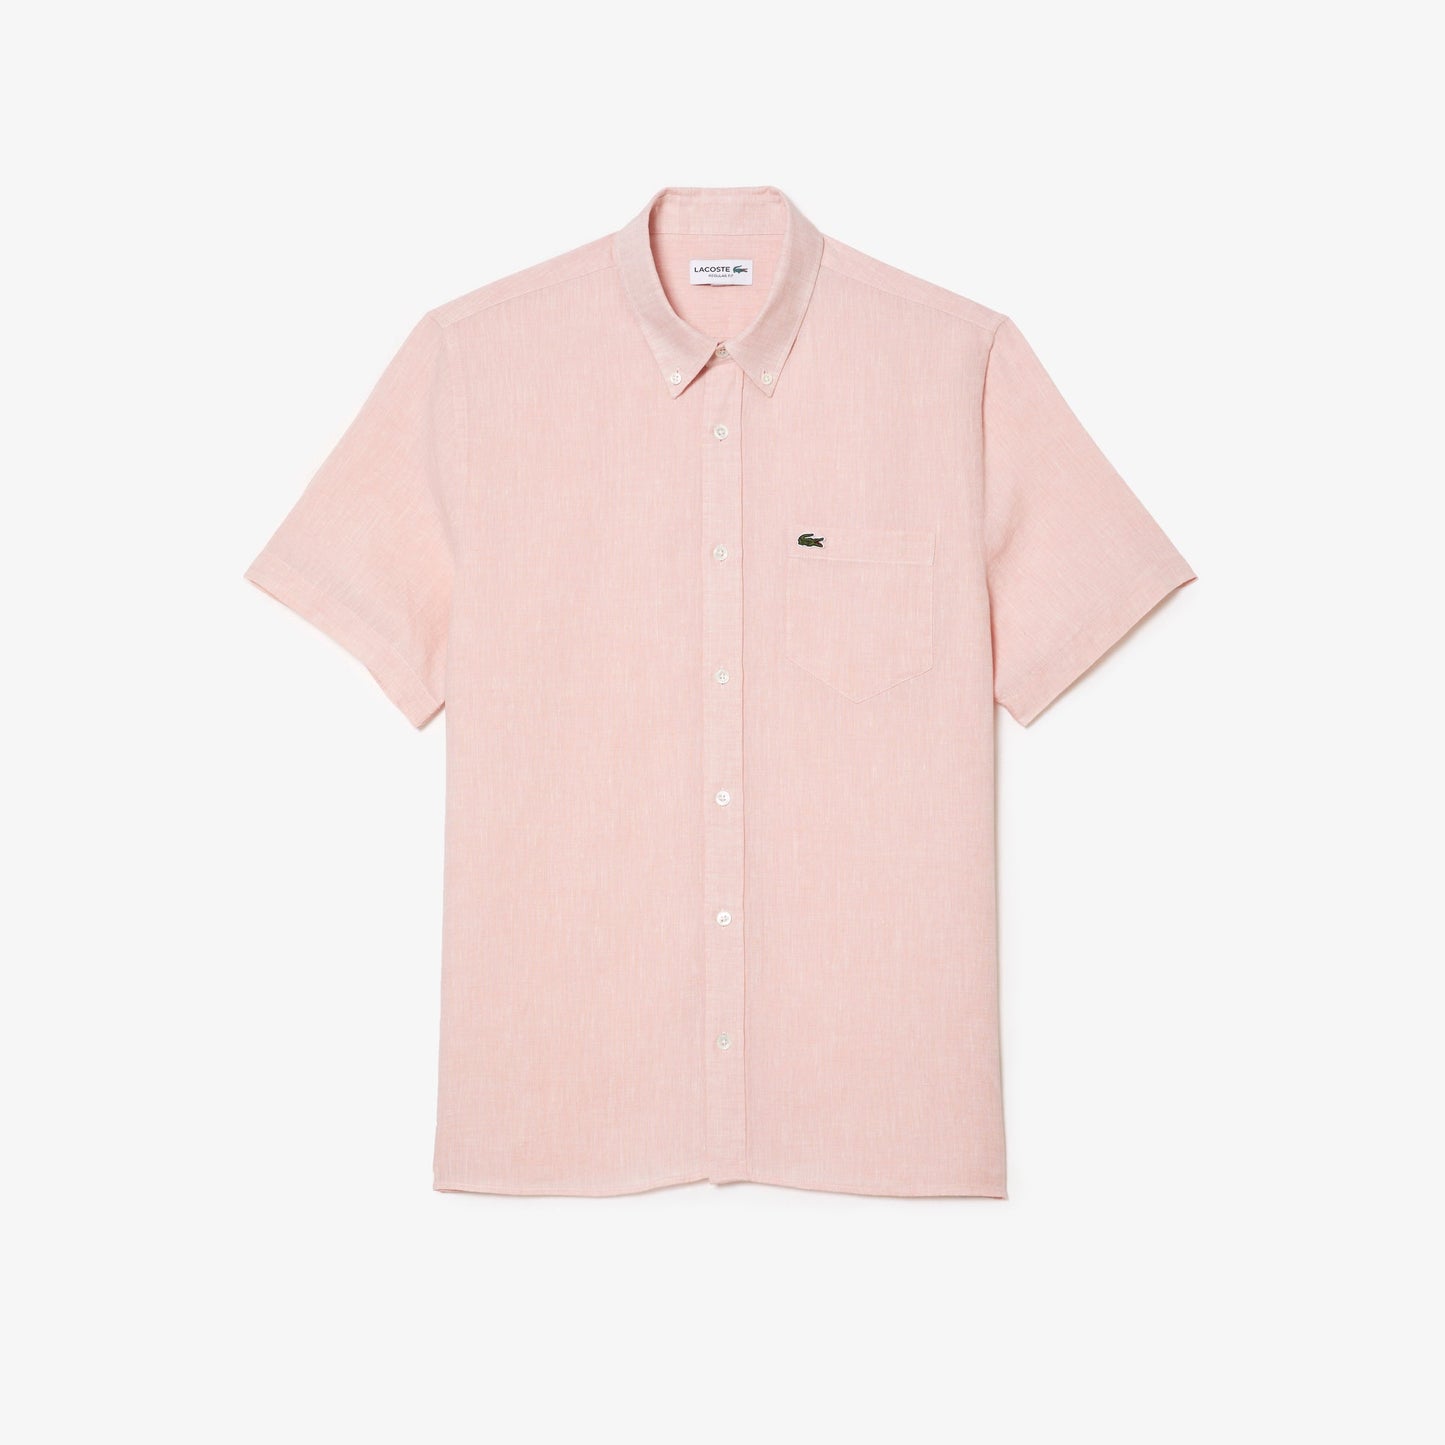 Shop The Latest Collection Of Lacoste MenS Lacoste Short Sleeve Linen Shirt - Ch5699 In Lebanon